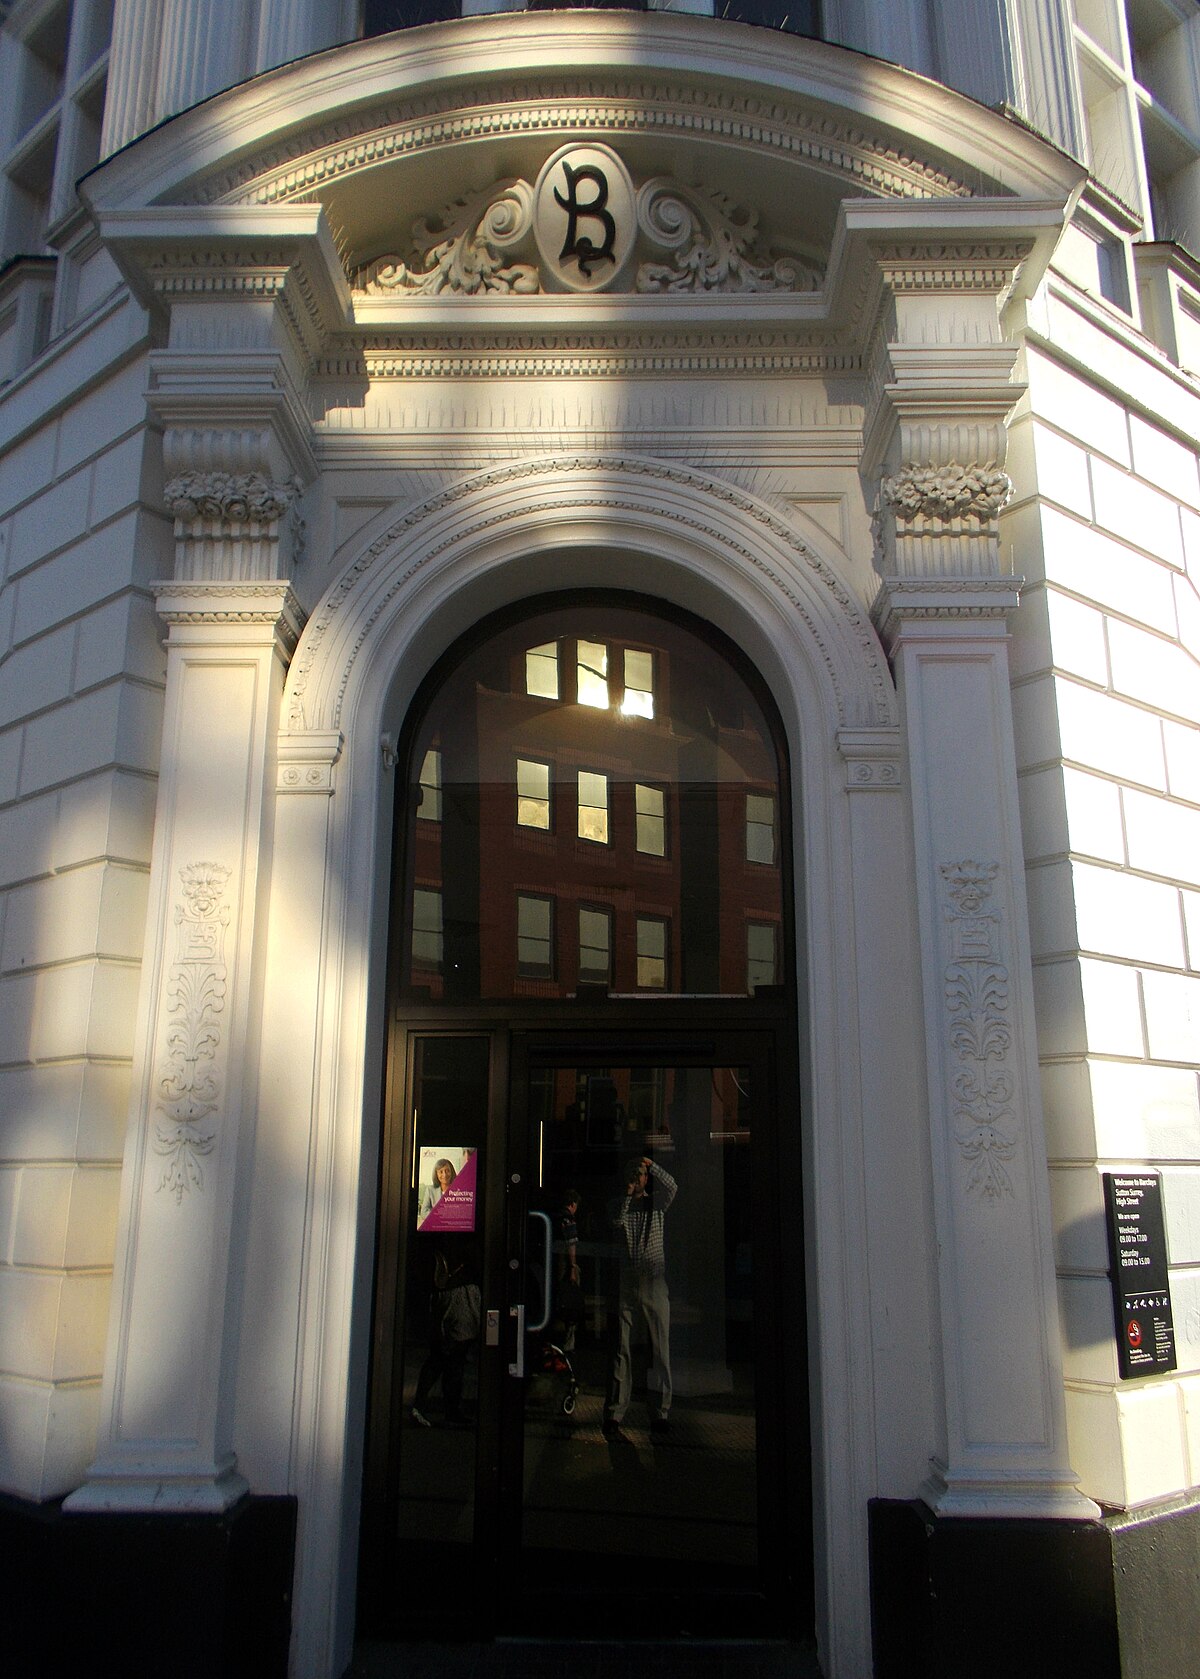 File:Barclay's Bank, SUTTON, Greater London (13).jpg - Wikimedia Commons